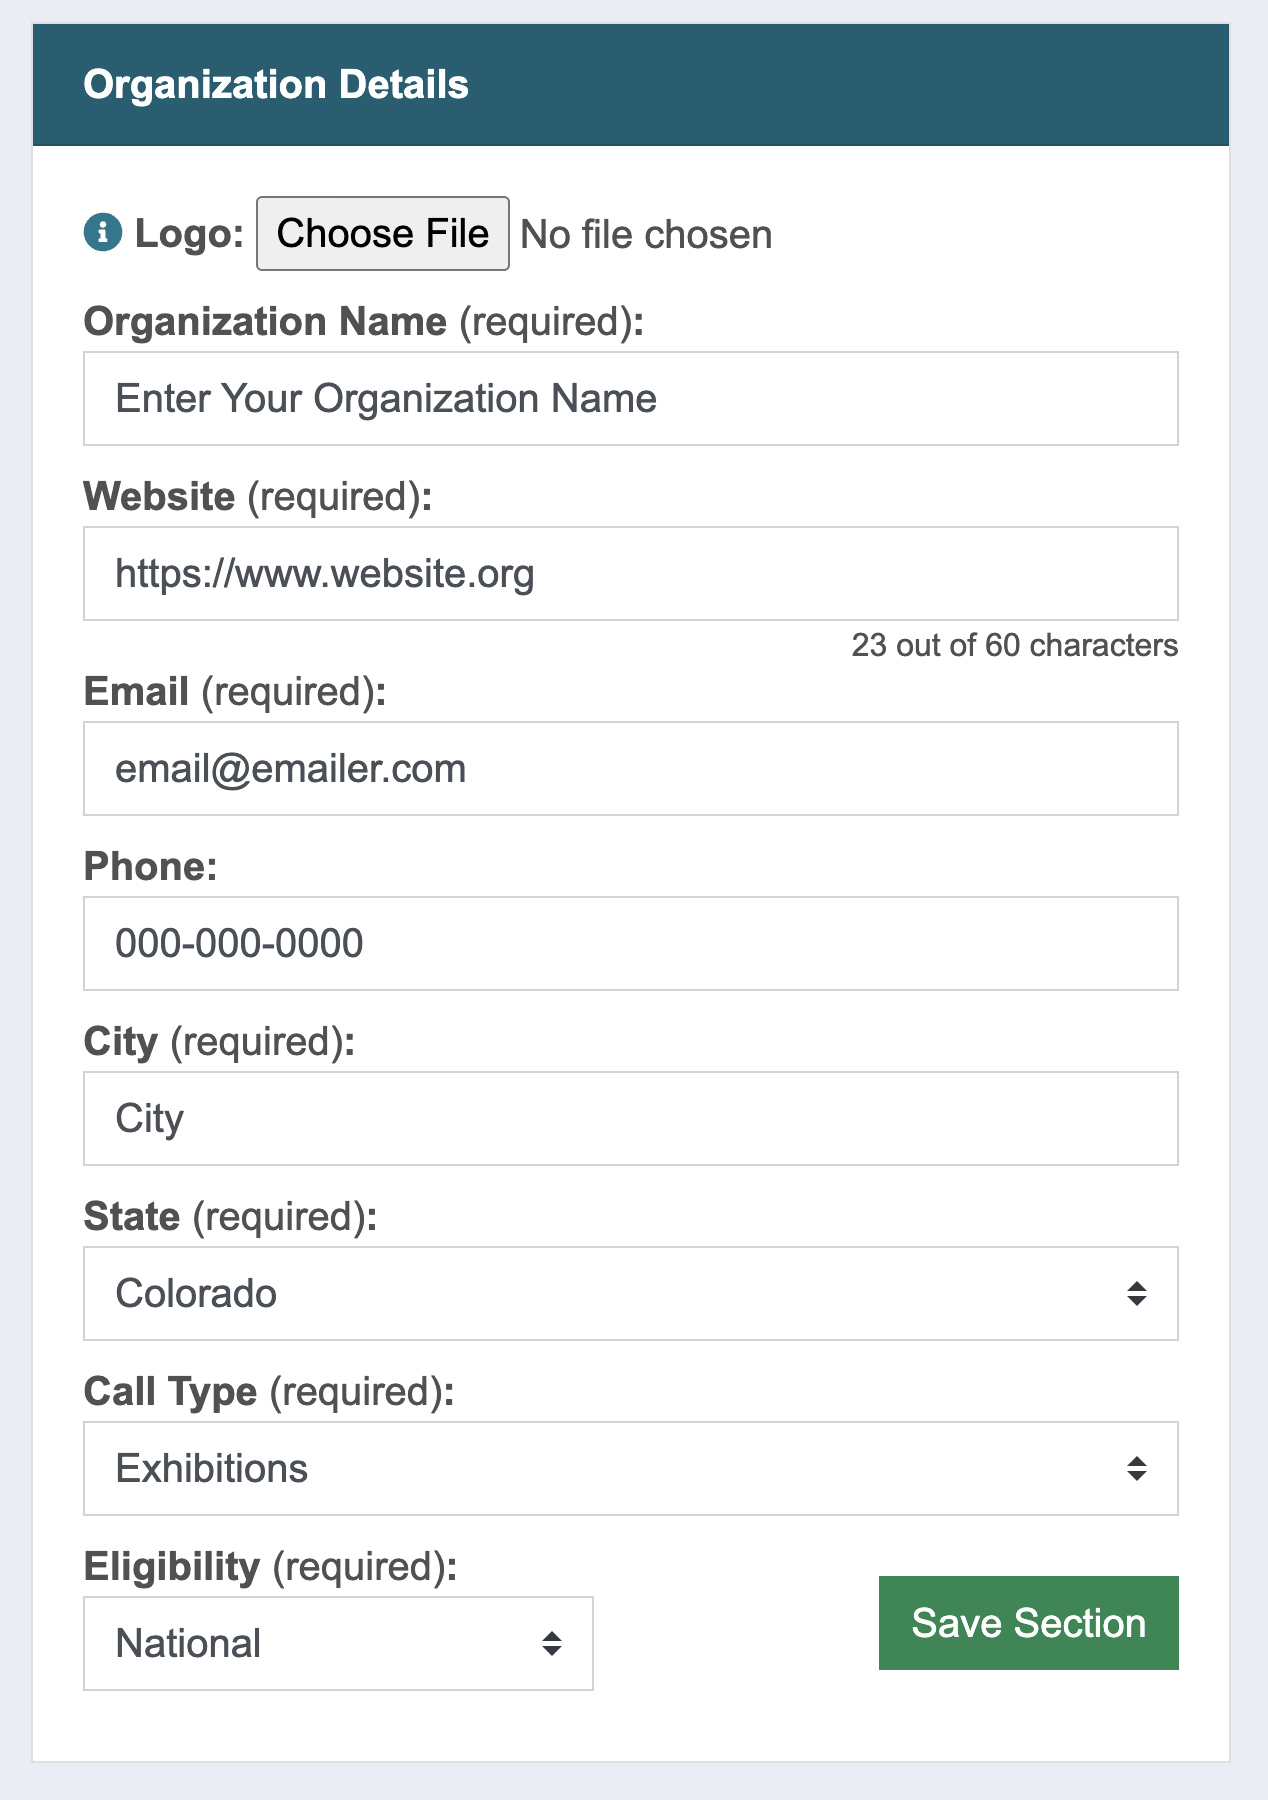 Screenshot of the organization details section.